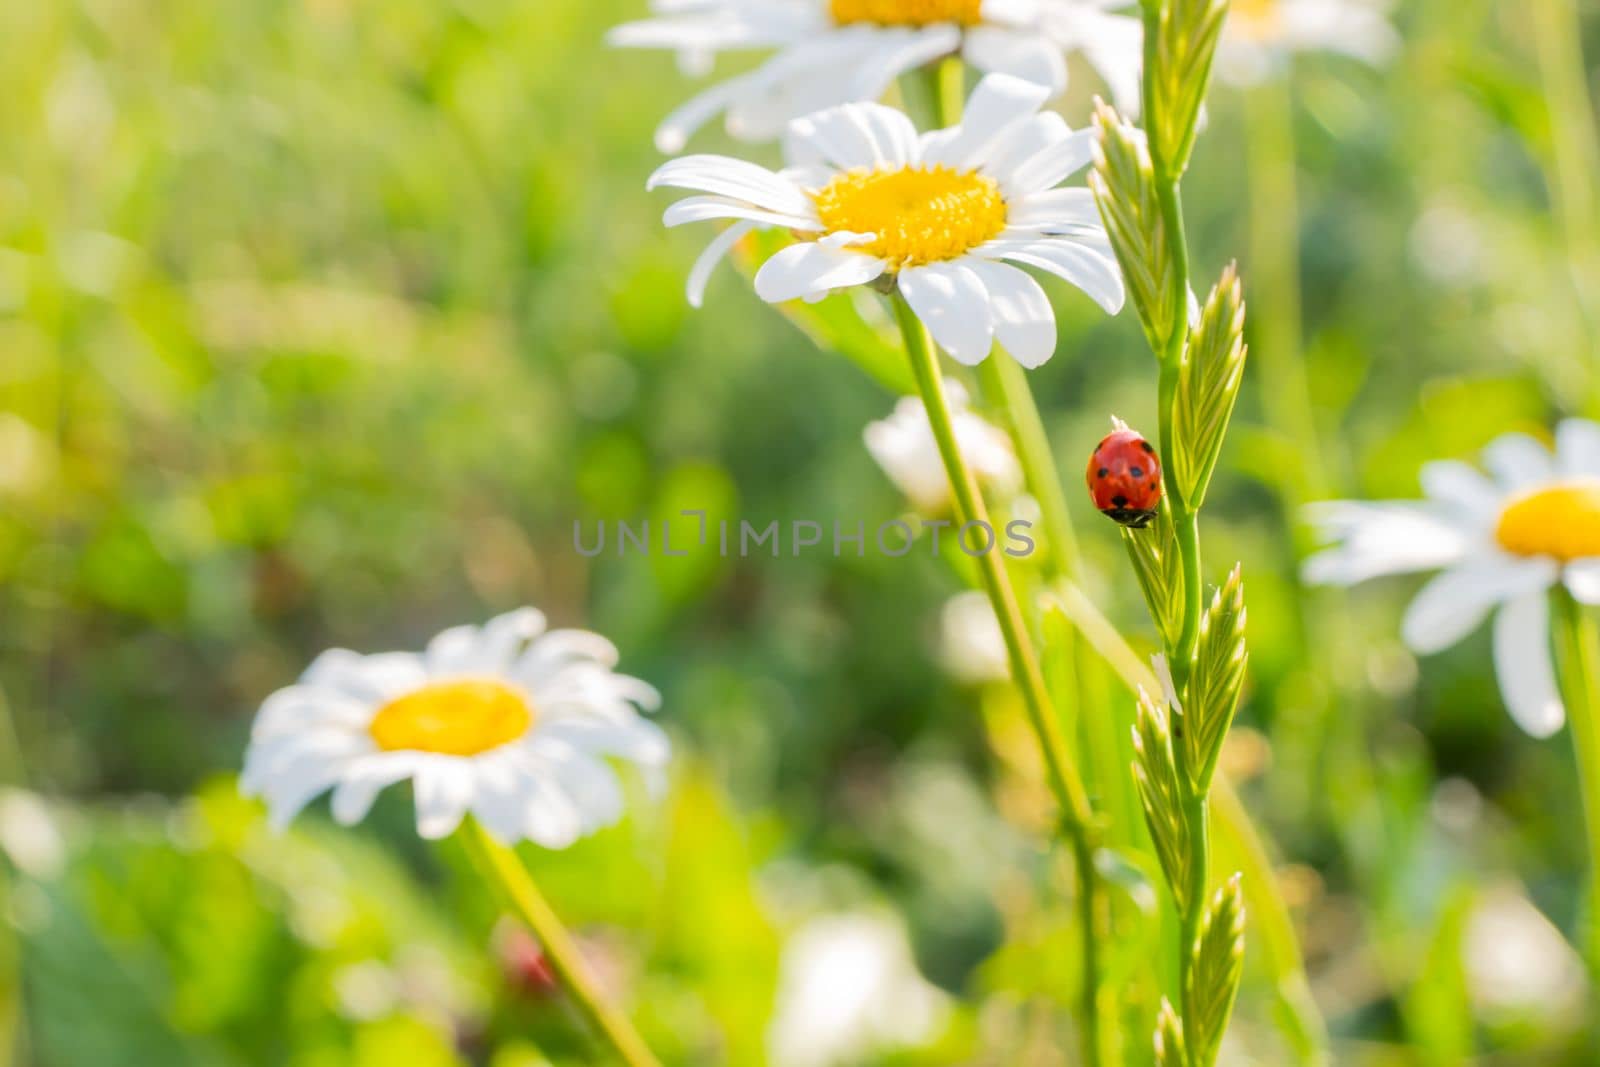 ladybug on chamomile flower close up, green natural blurred background. spring summer season. symbol of purity freshness nature, organic, ecological life. beautiful nature scene. copy space. High quality photo